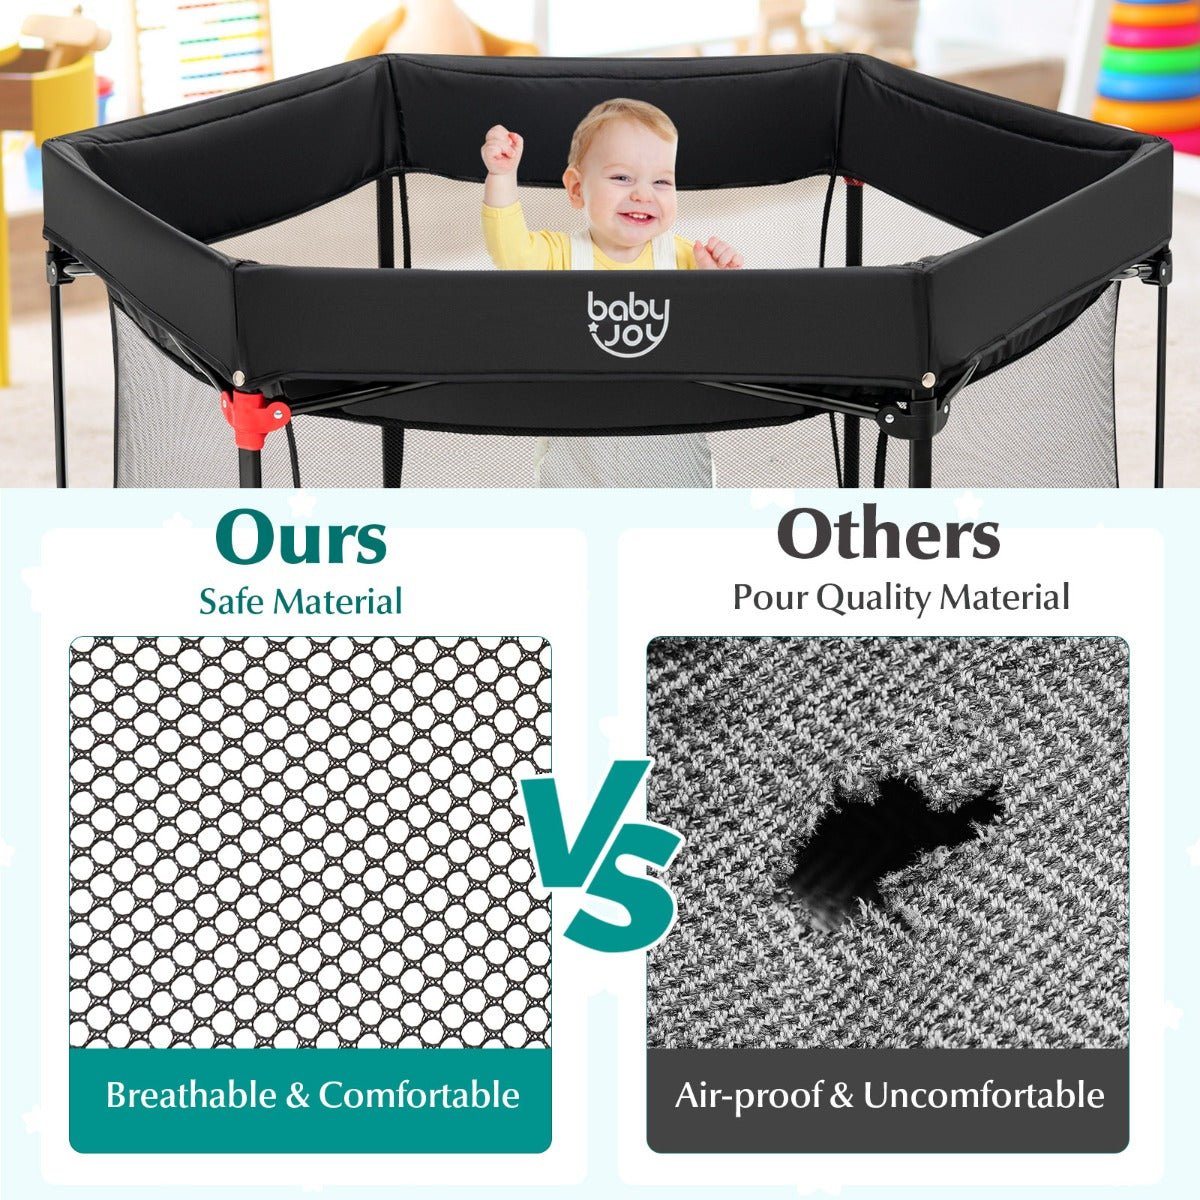 Black Portable Baby Playpen with Removable Canopy: Versatile for Indoor & Outdoor